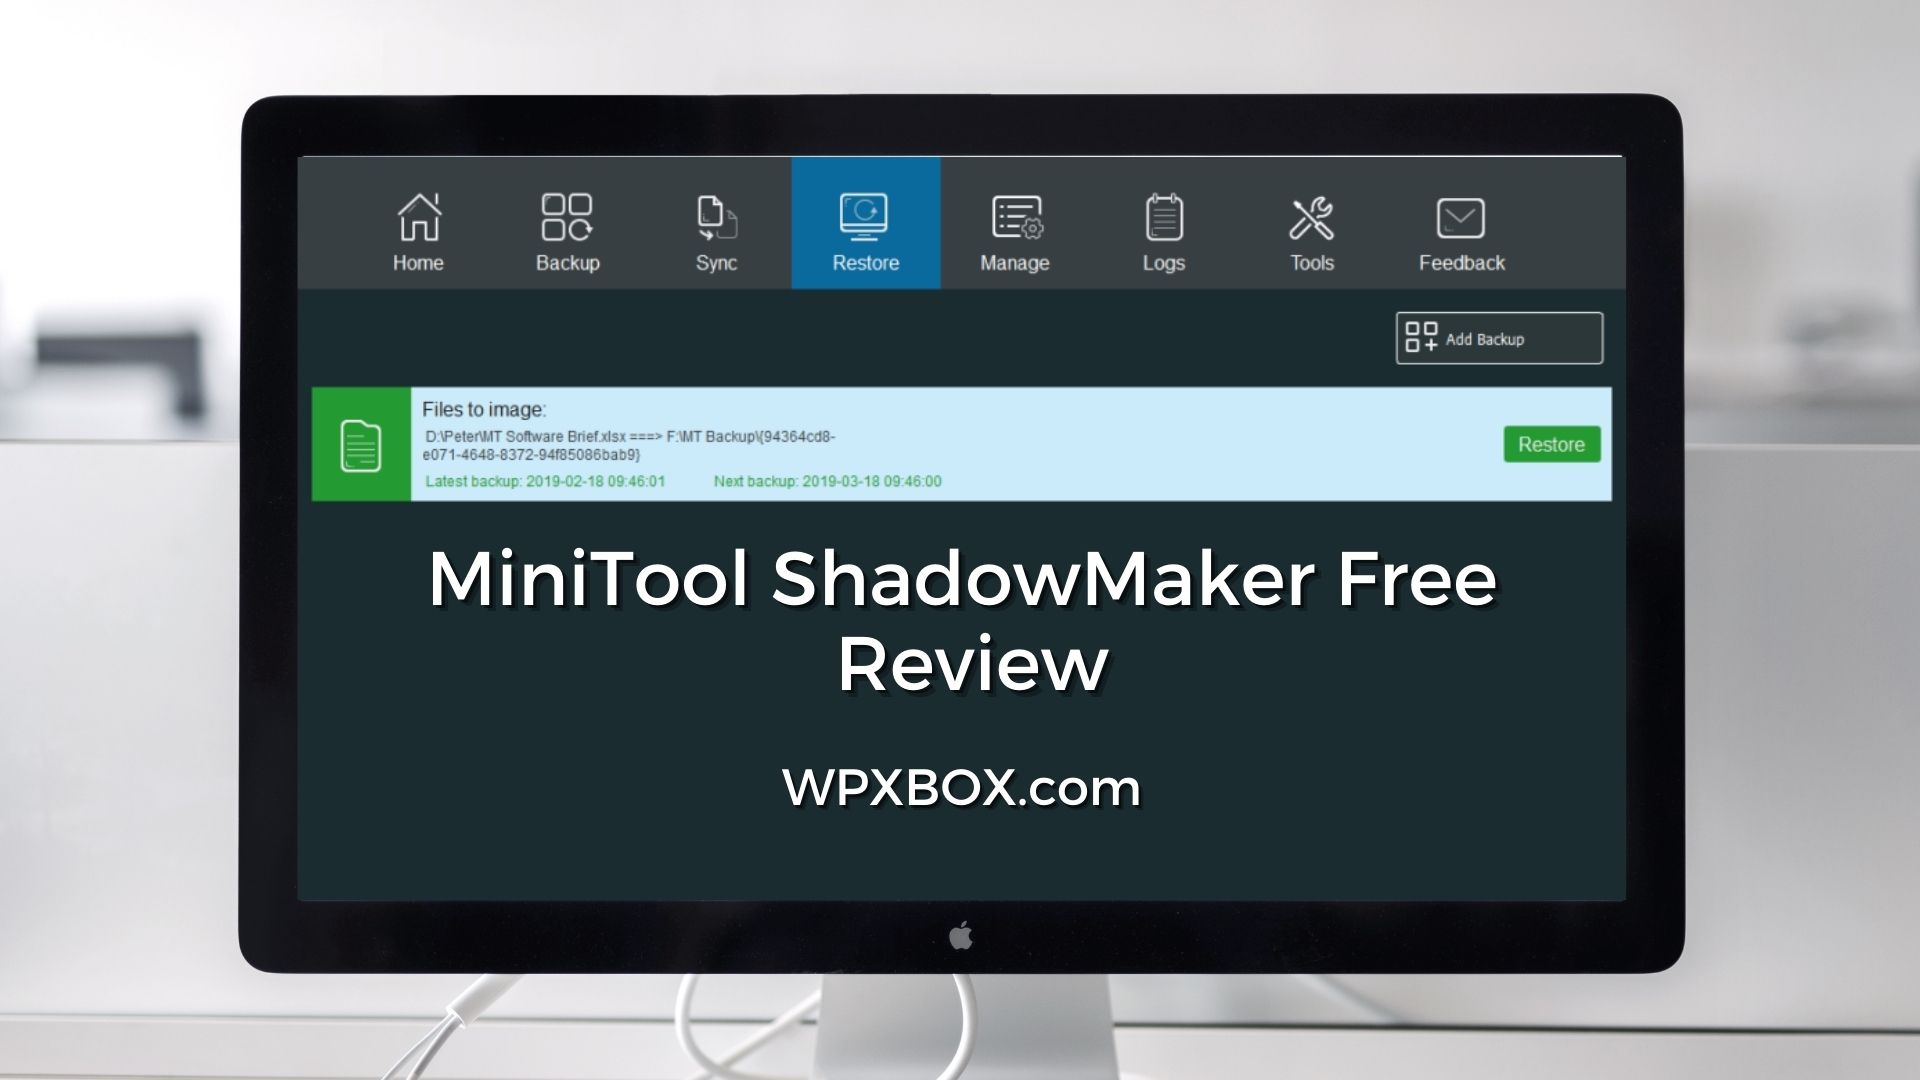 MiniTool ShadowMaker 4.3.0 download the new version